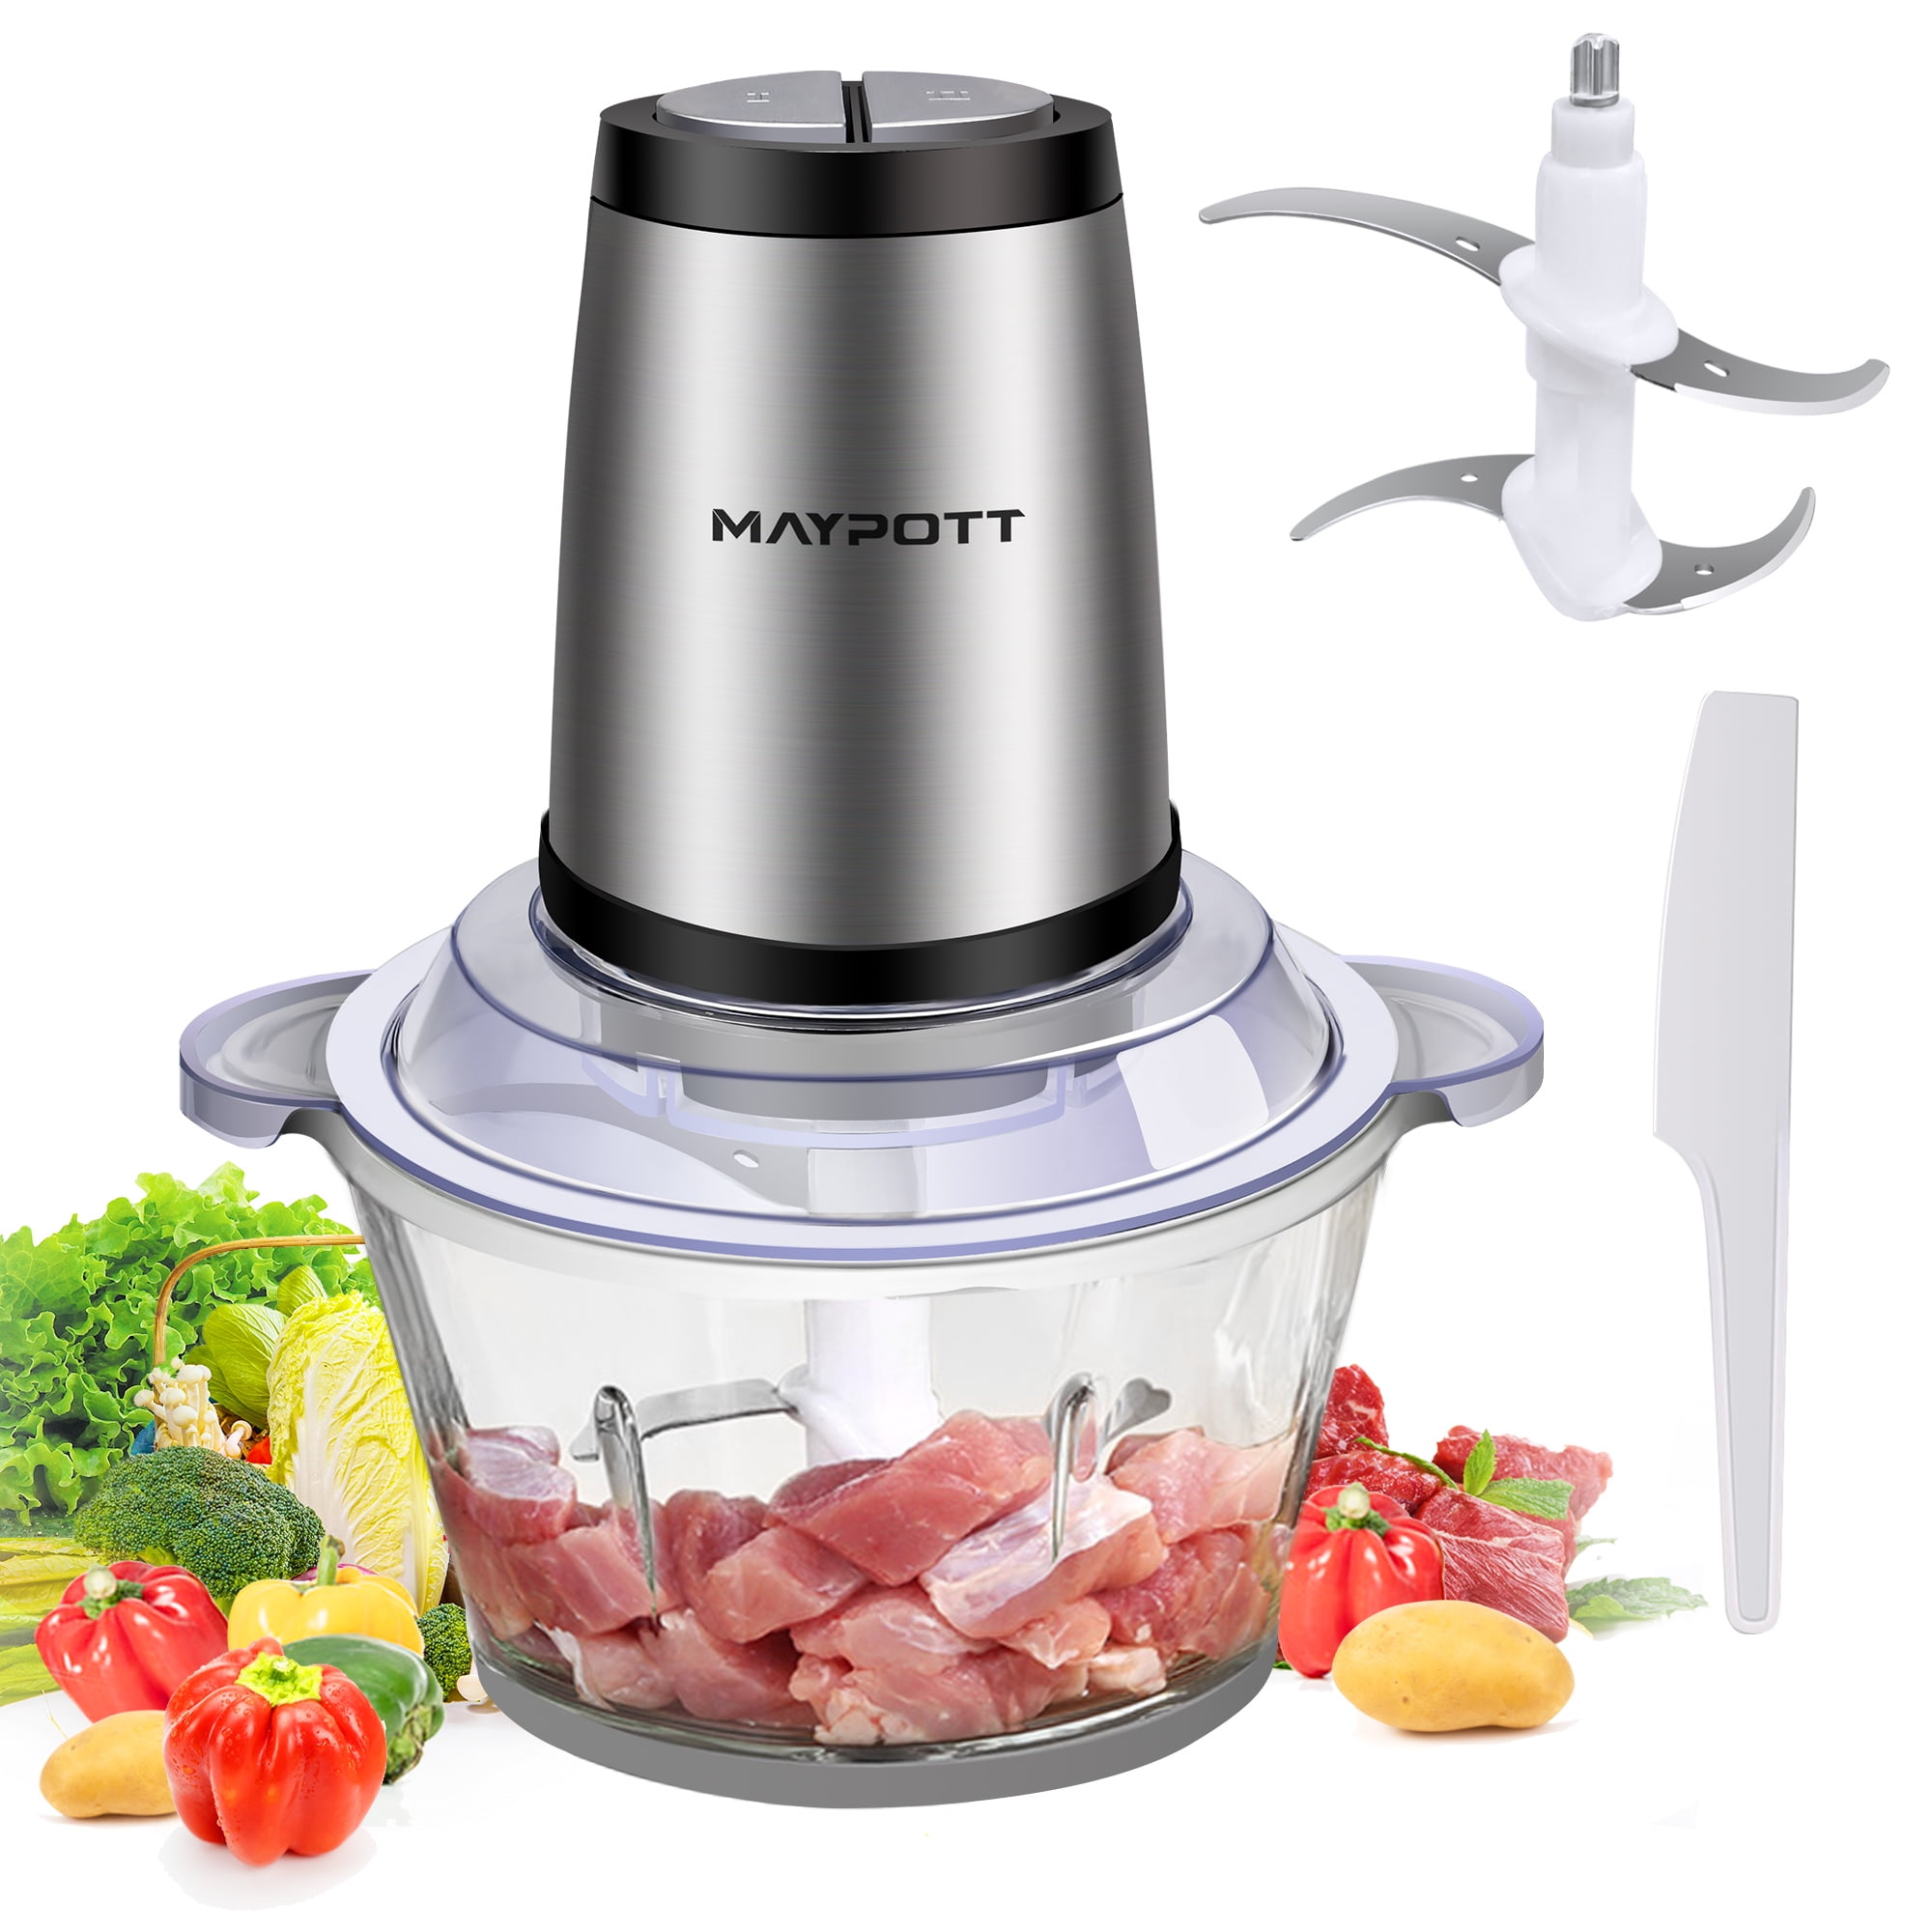  Reemix 1.5-Cup One-Touch Electric Food Chopper, 100W Mini Food  Processor Meat Grinder, Mix, Chop, Mince and Blend Vegetables, Fruits,  Nuts, Meats, Stainless Steel Blade (Red): Home & Kitchen